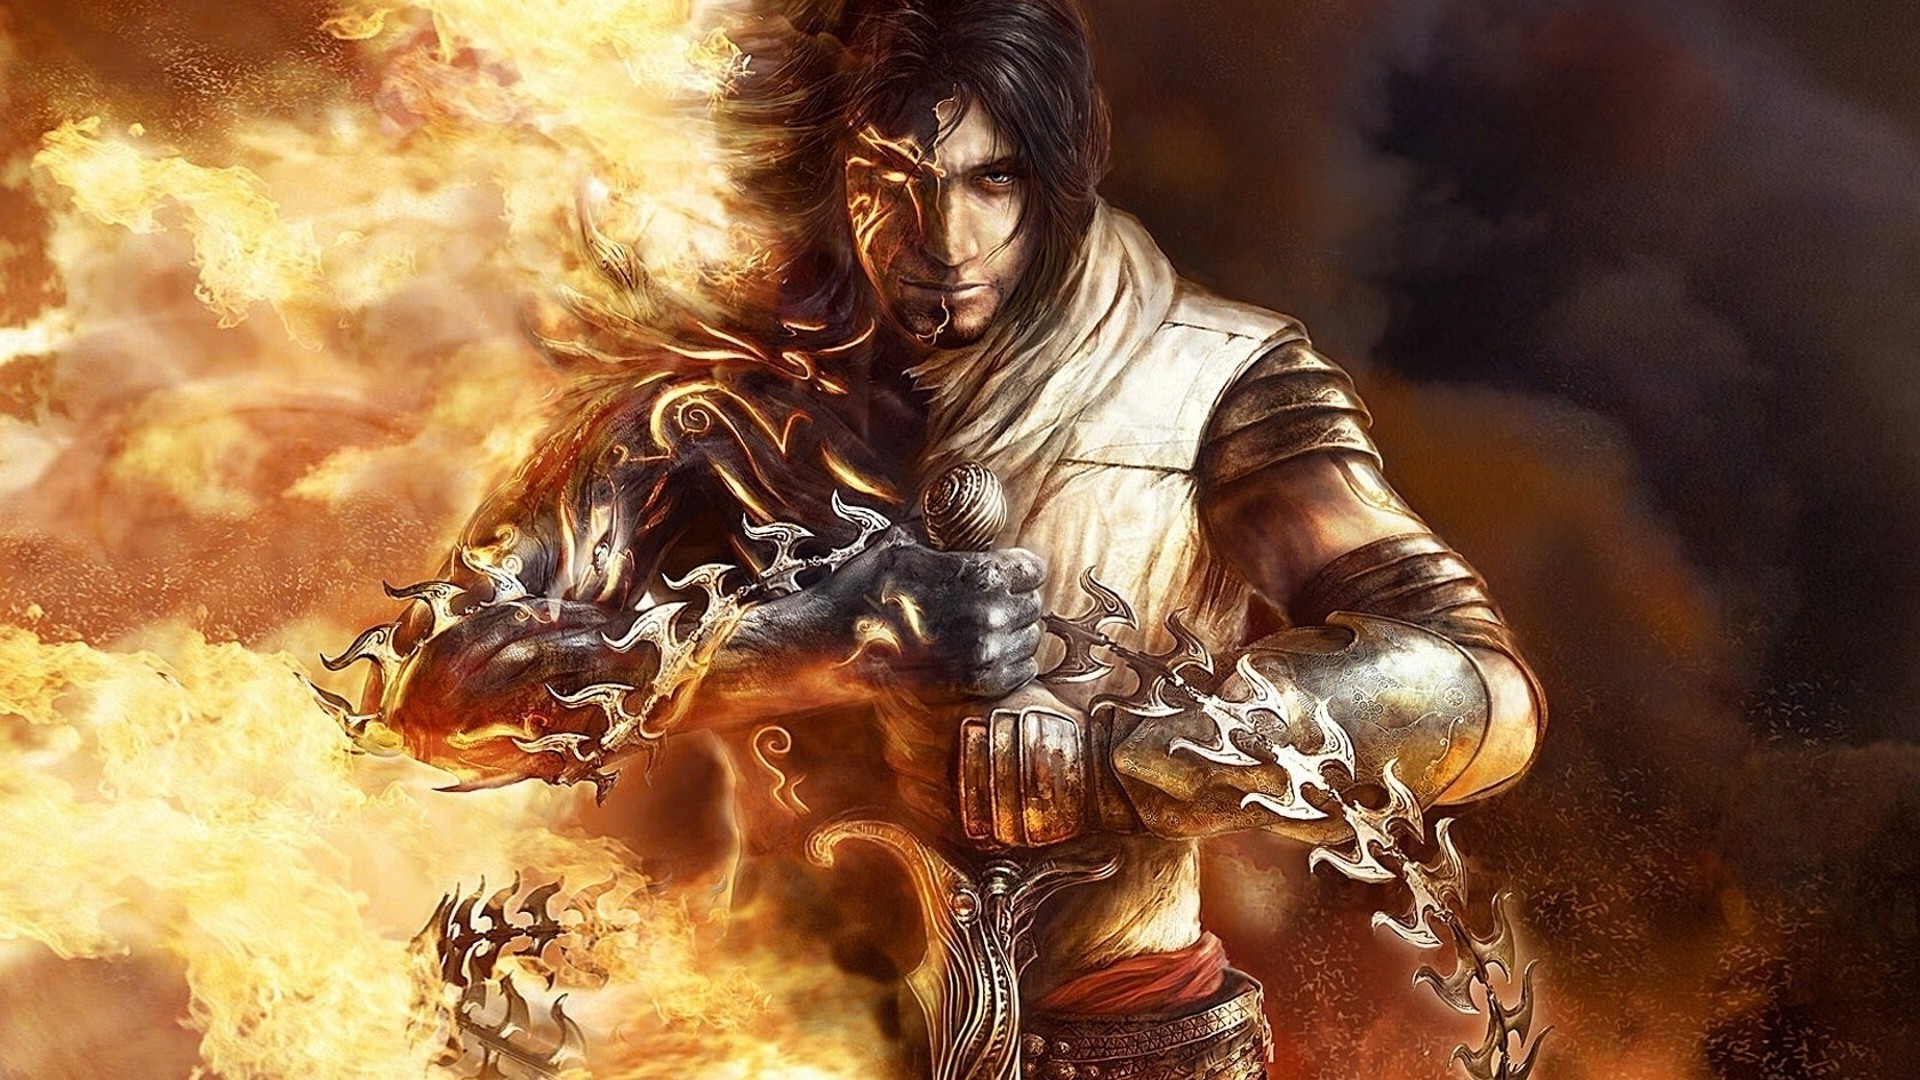 fantasy Art, Heroes, Men, Sword, Fire, Armor, Prince Of Persia, Video Games, Prince Of Persia: The Two Thrones Wallpaper